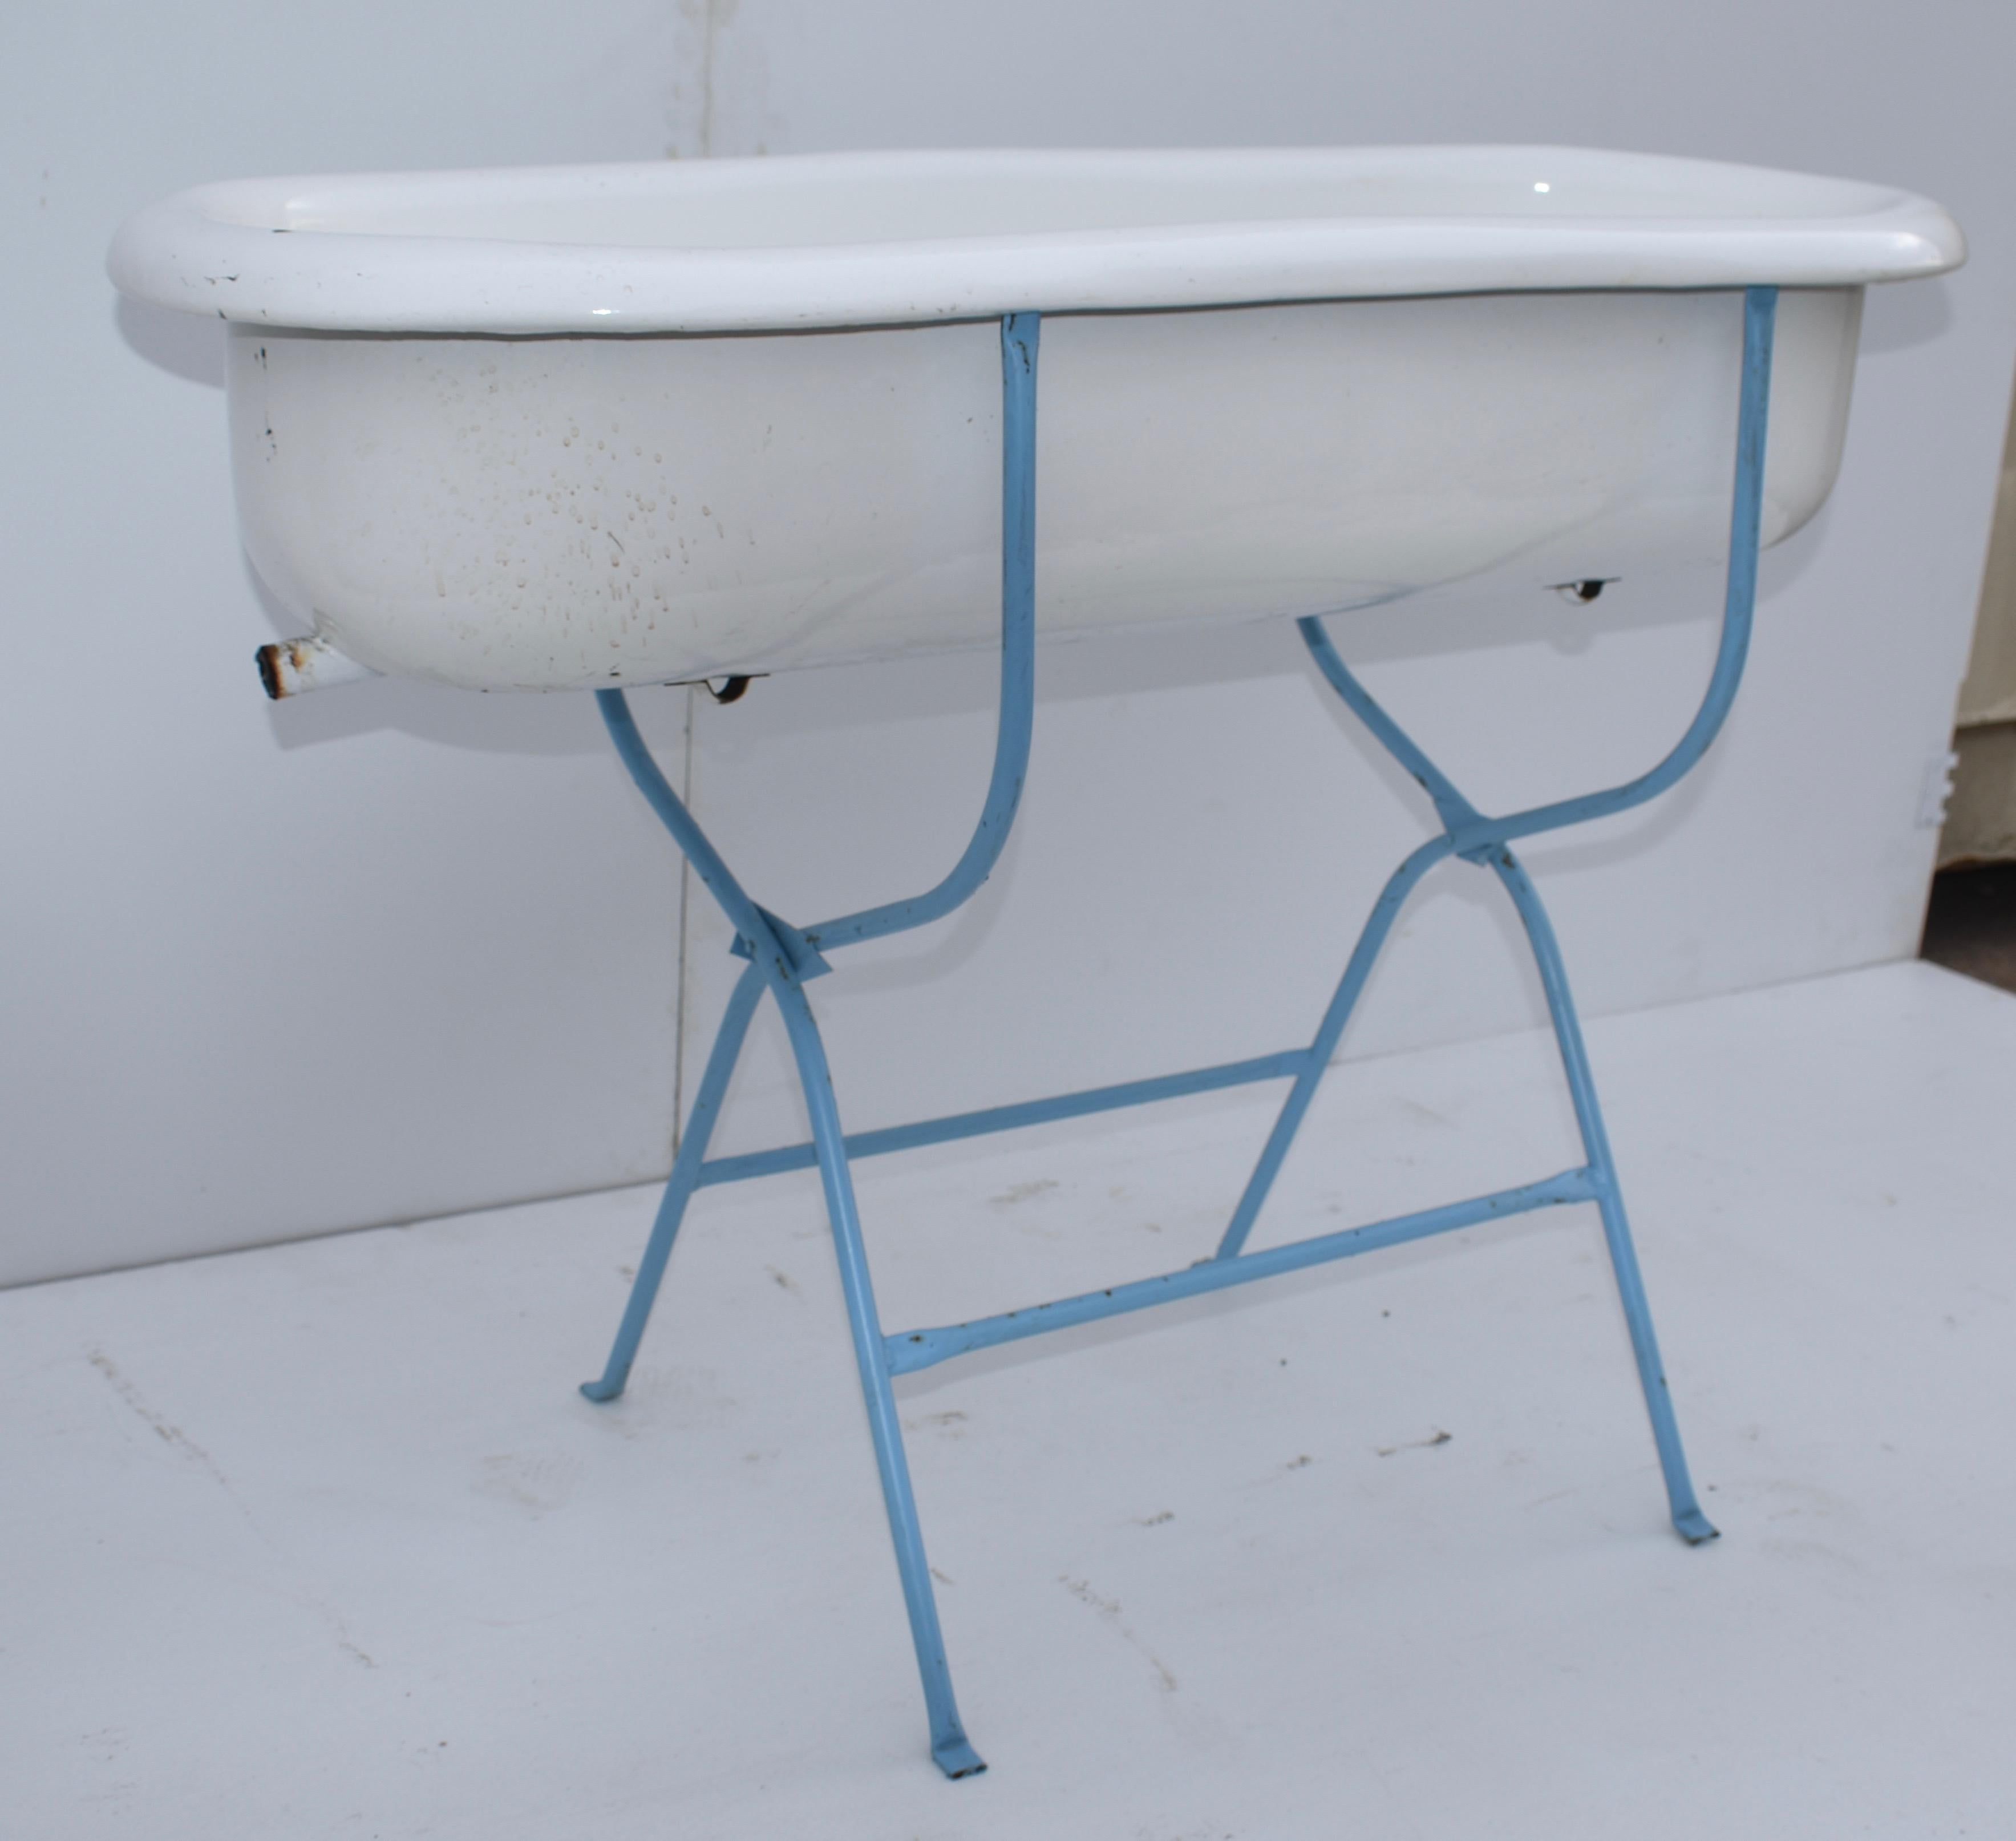 Country Porcelain Enamel Baby Bath on Stand